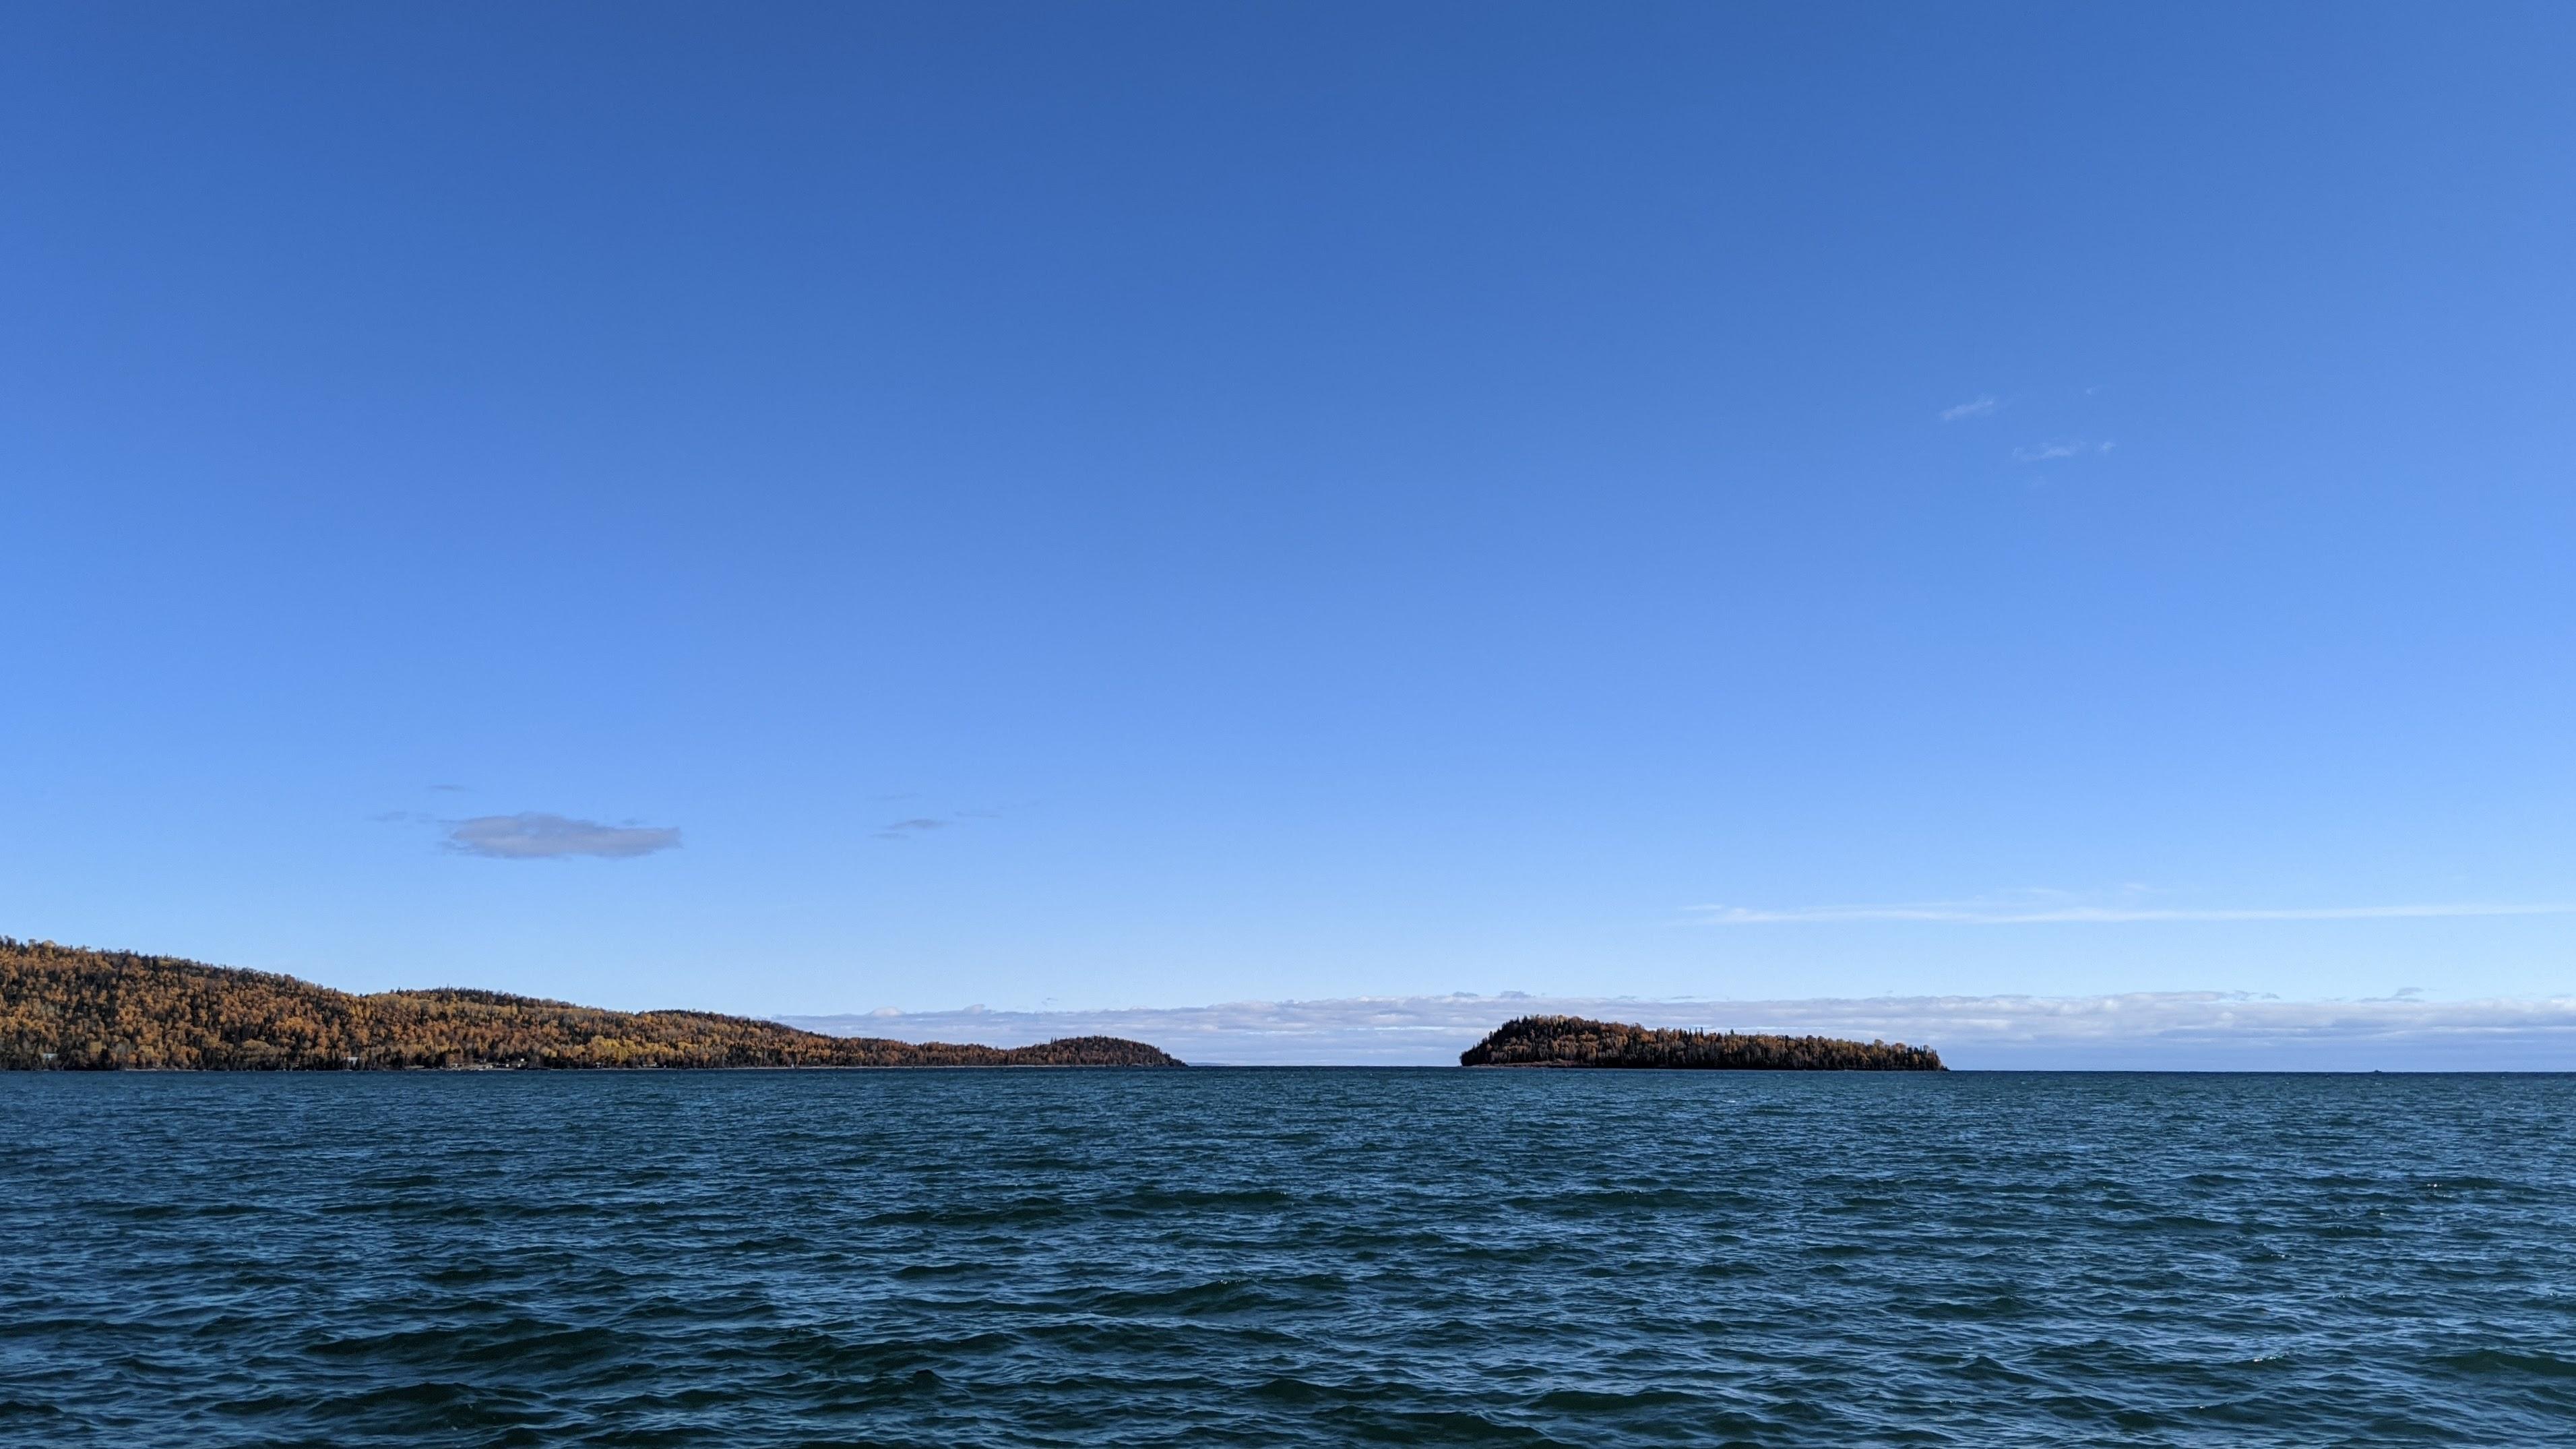 A photograph of Lake Superior with a forested peninsula at left nearby a small island, under a blue sky.